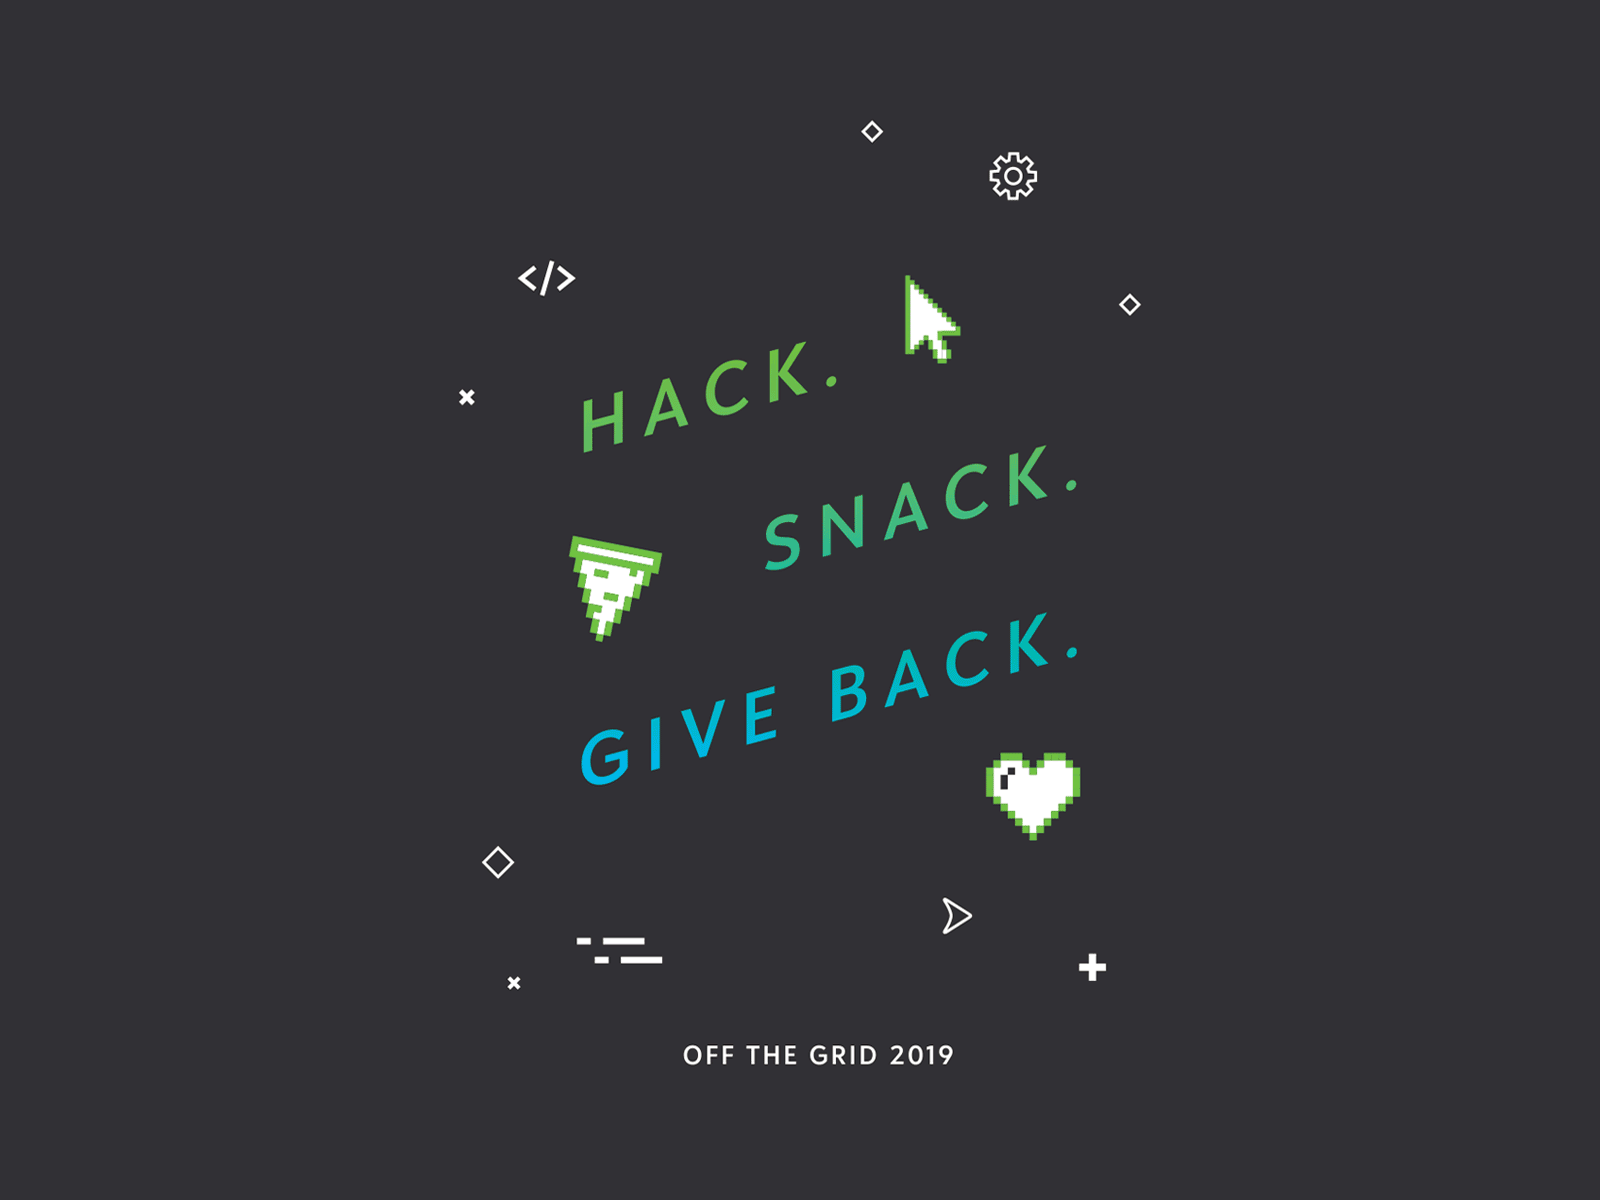 Off the Grid 2019 Tee blackbaud corporate corporate design event gif give back hack hack day hackathon icons it programmer rdo shirt shirt design snack tshirt tshirt design web web icons